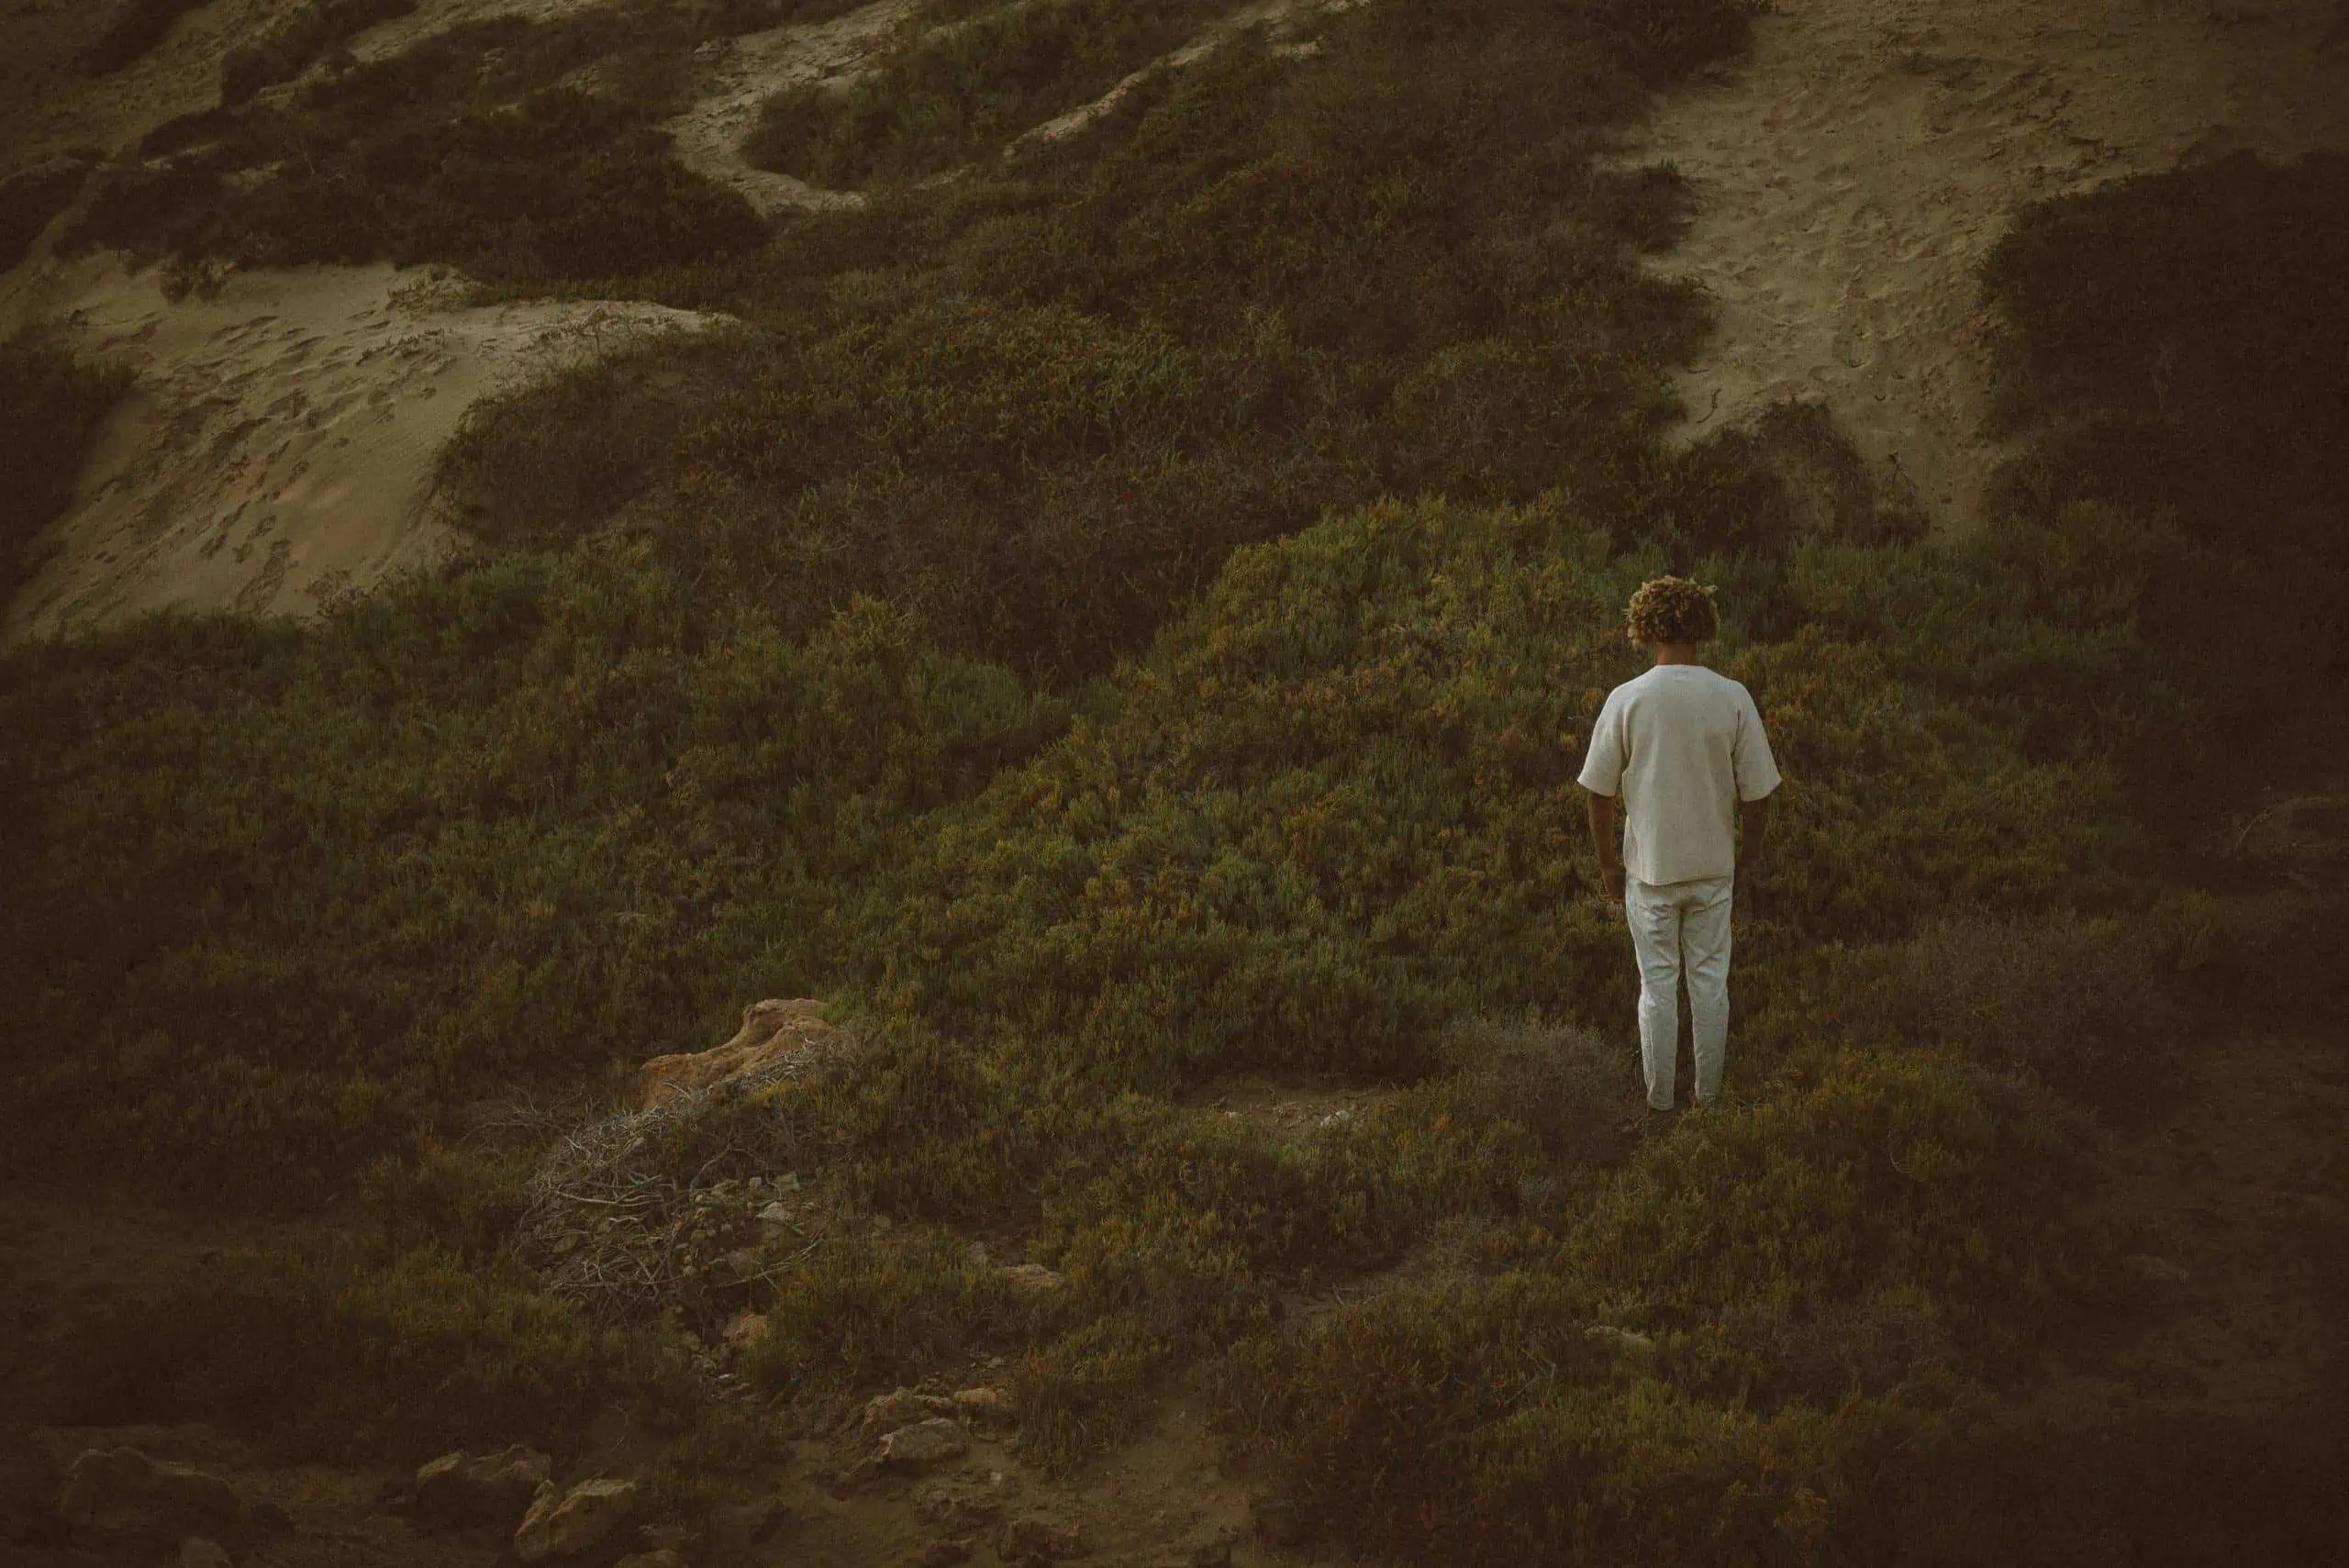 Man in white clothes standing alone on a hillside